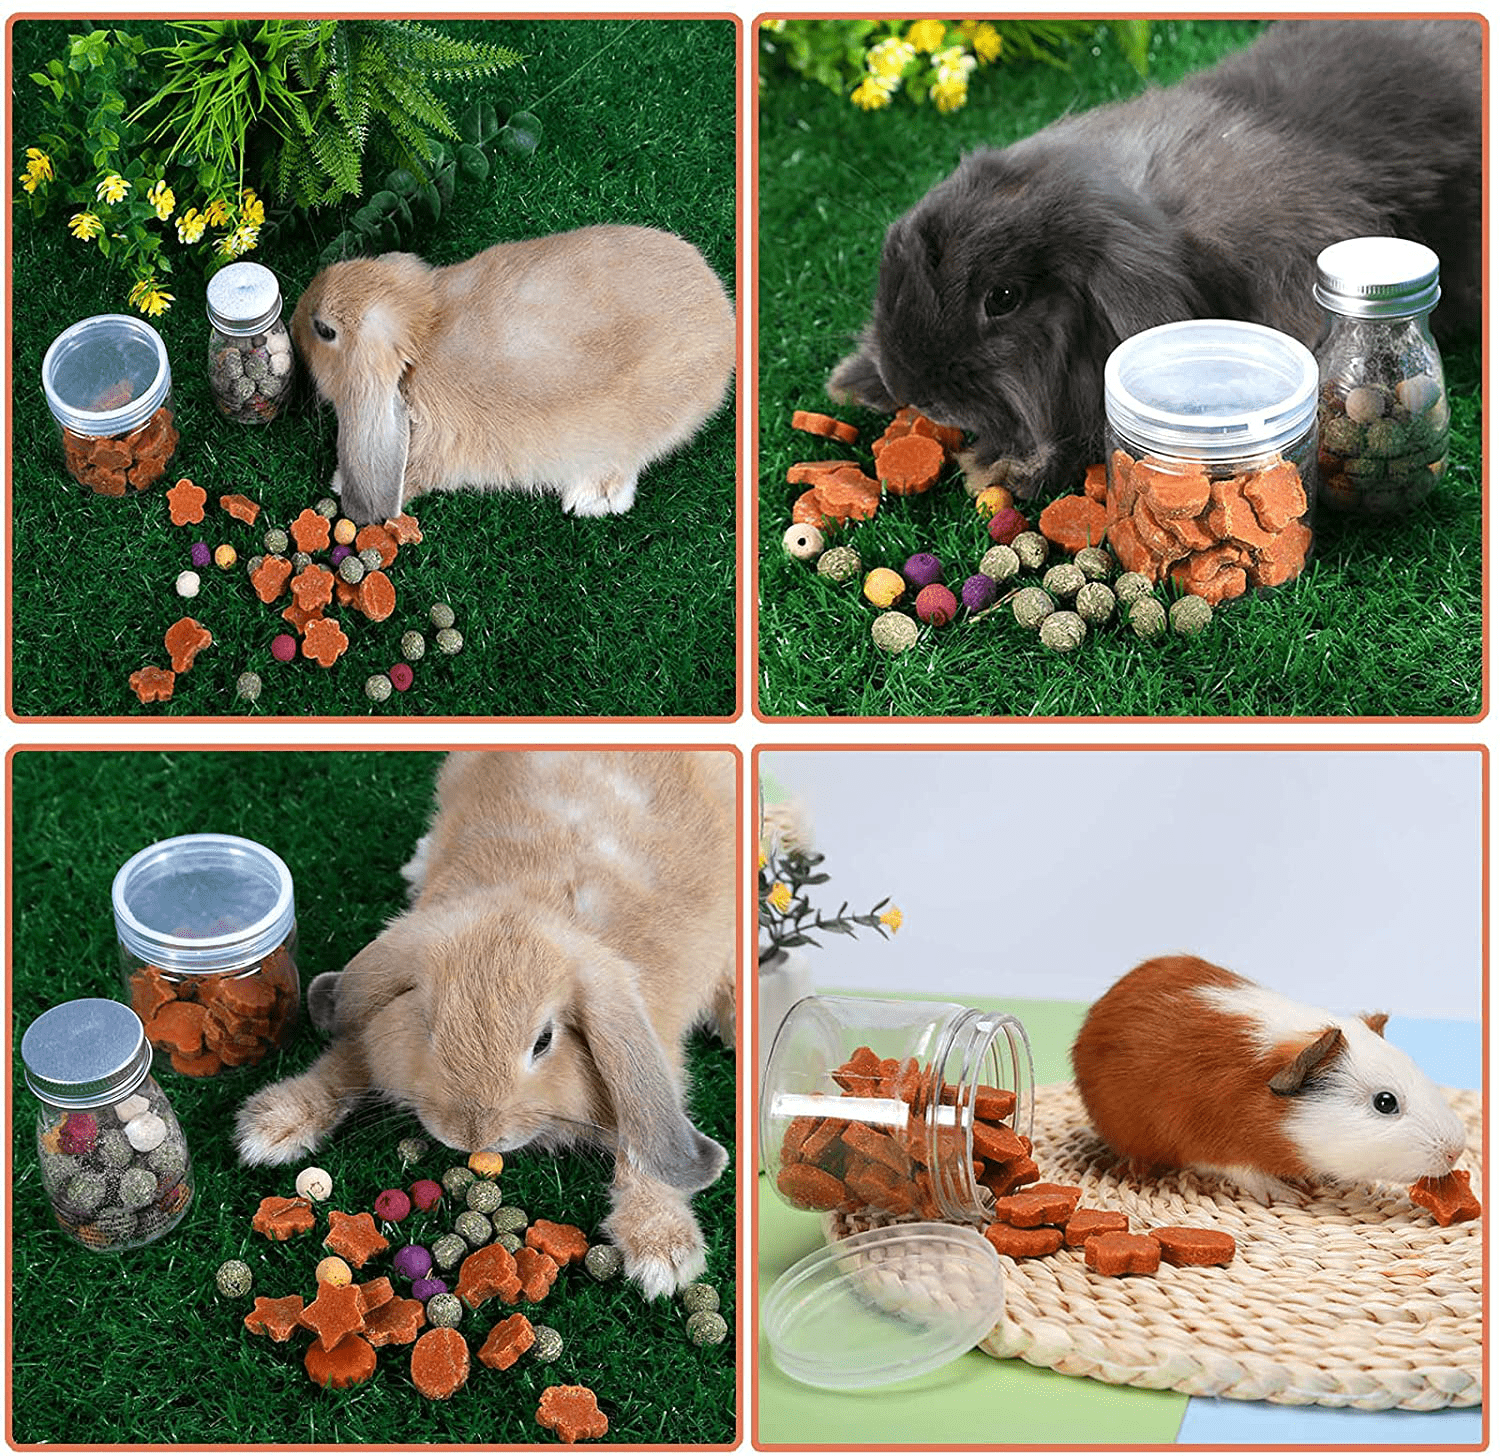 X-Pet Rabbit Chew Toys, Guinea Pig Treats 100% Natural Material Garden Stuff Flavored Biscuit&Grass Cake, Small Animals Teeth Grinding Chewing Suitable for Bunny Hamster Chinchilla Dwarf Gerbils